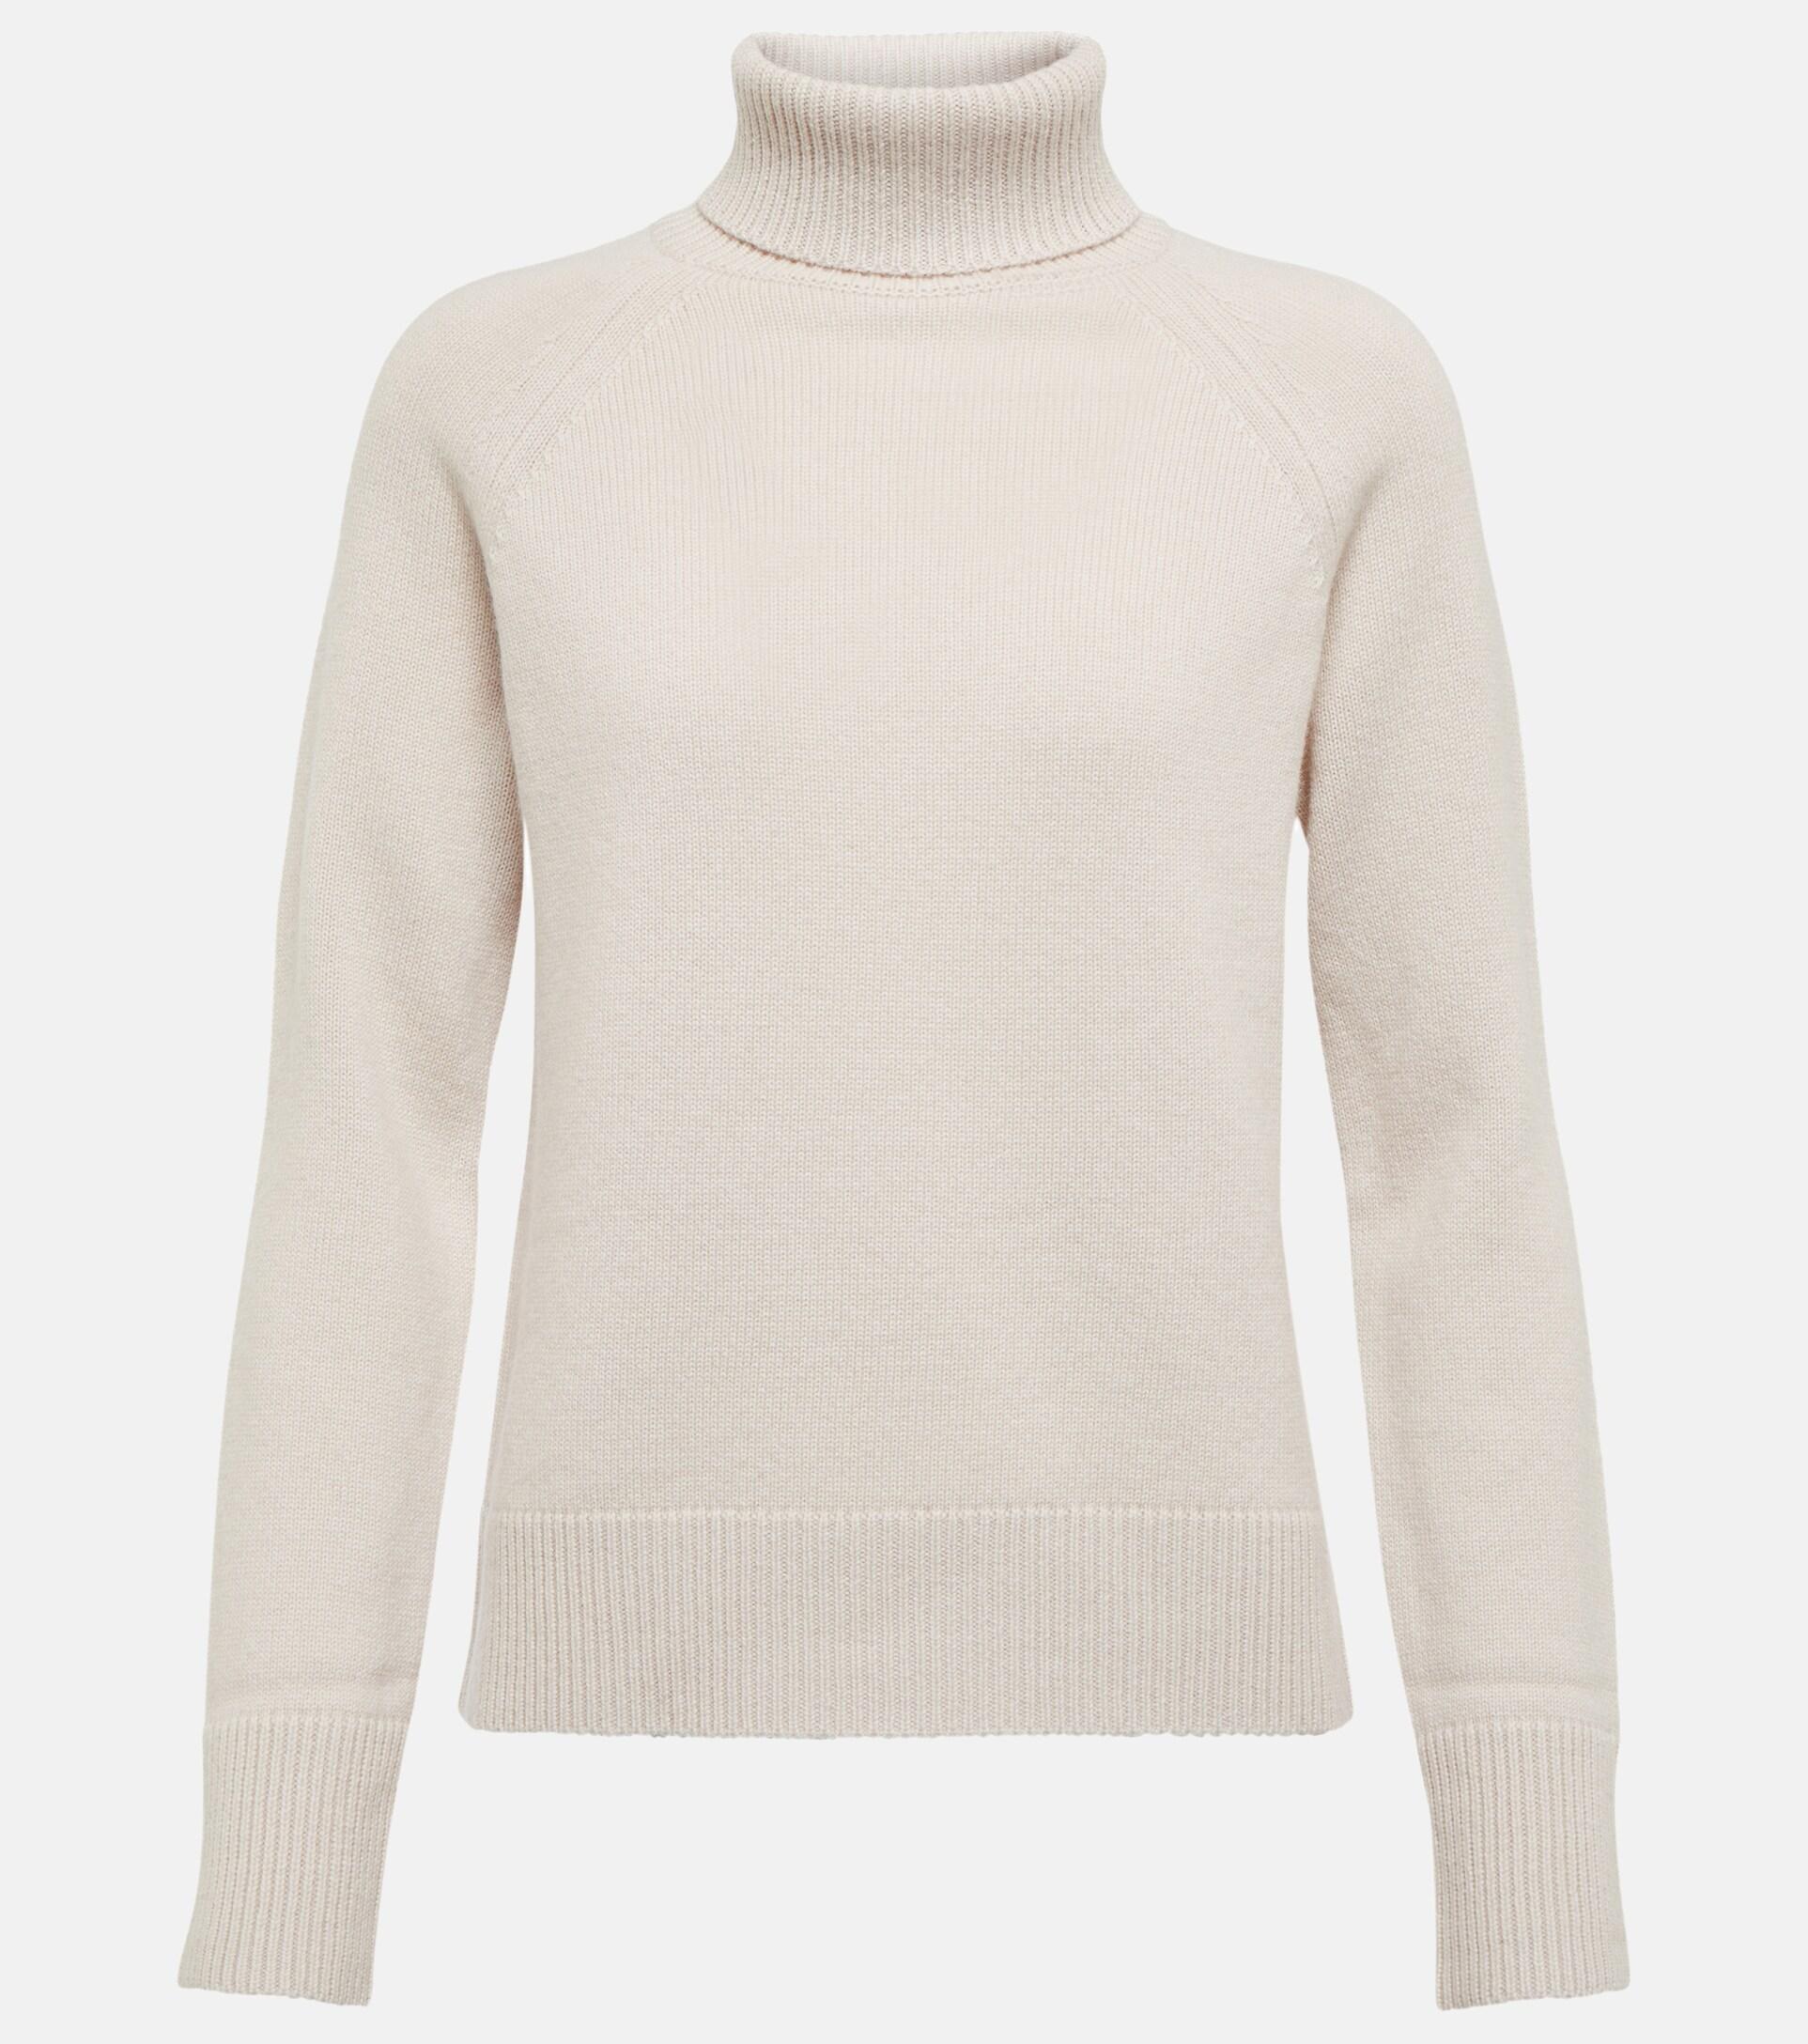 Max Mara Nadar Wool And Cashmere Turtleneck Sweater in White | Lyst